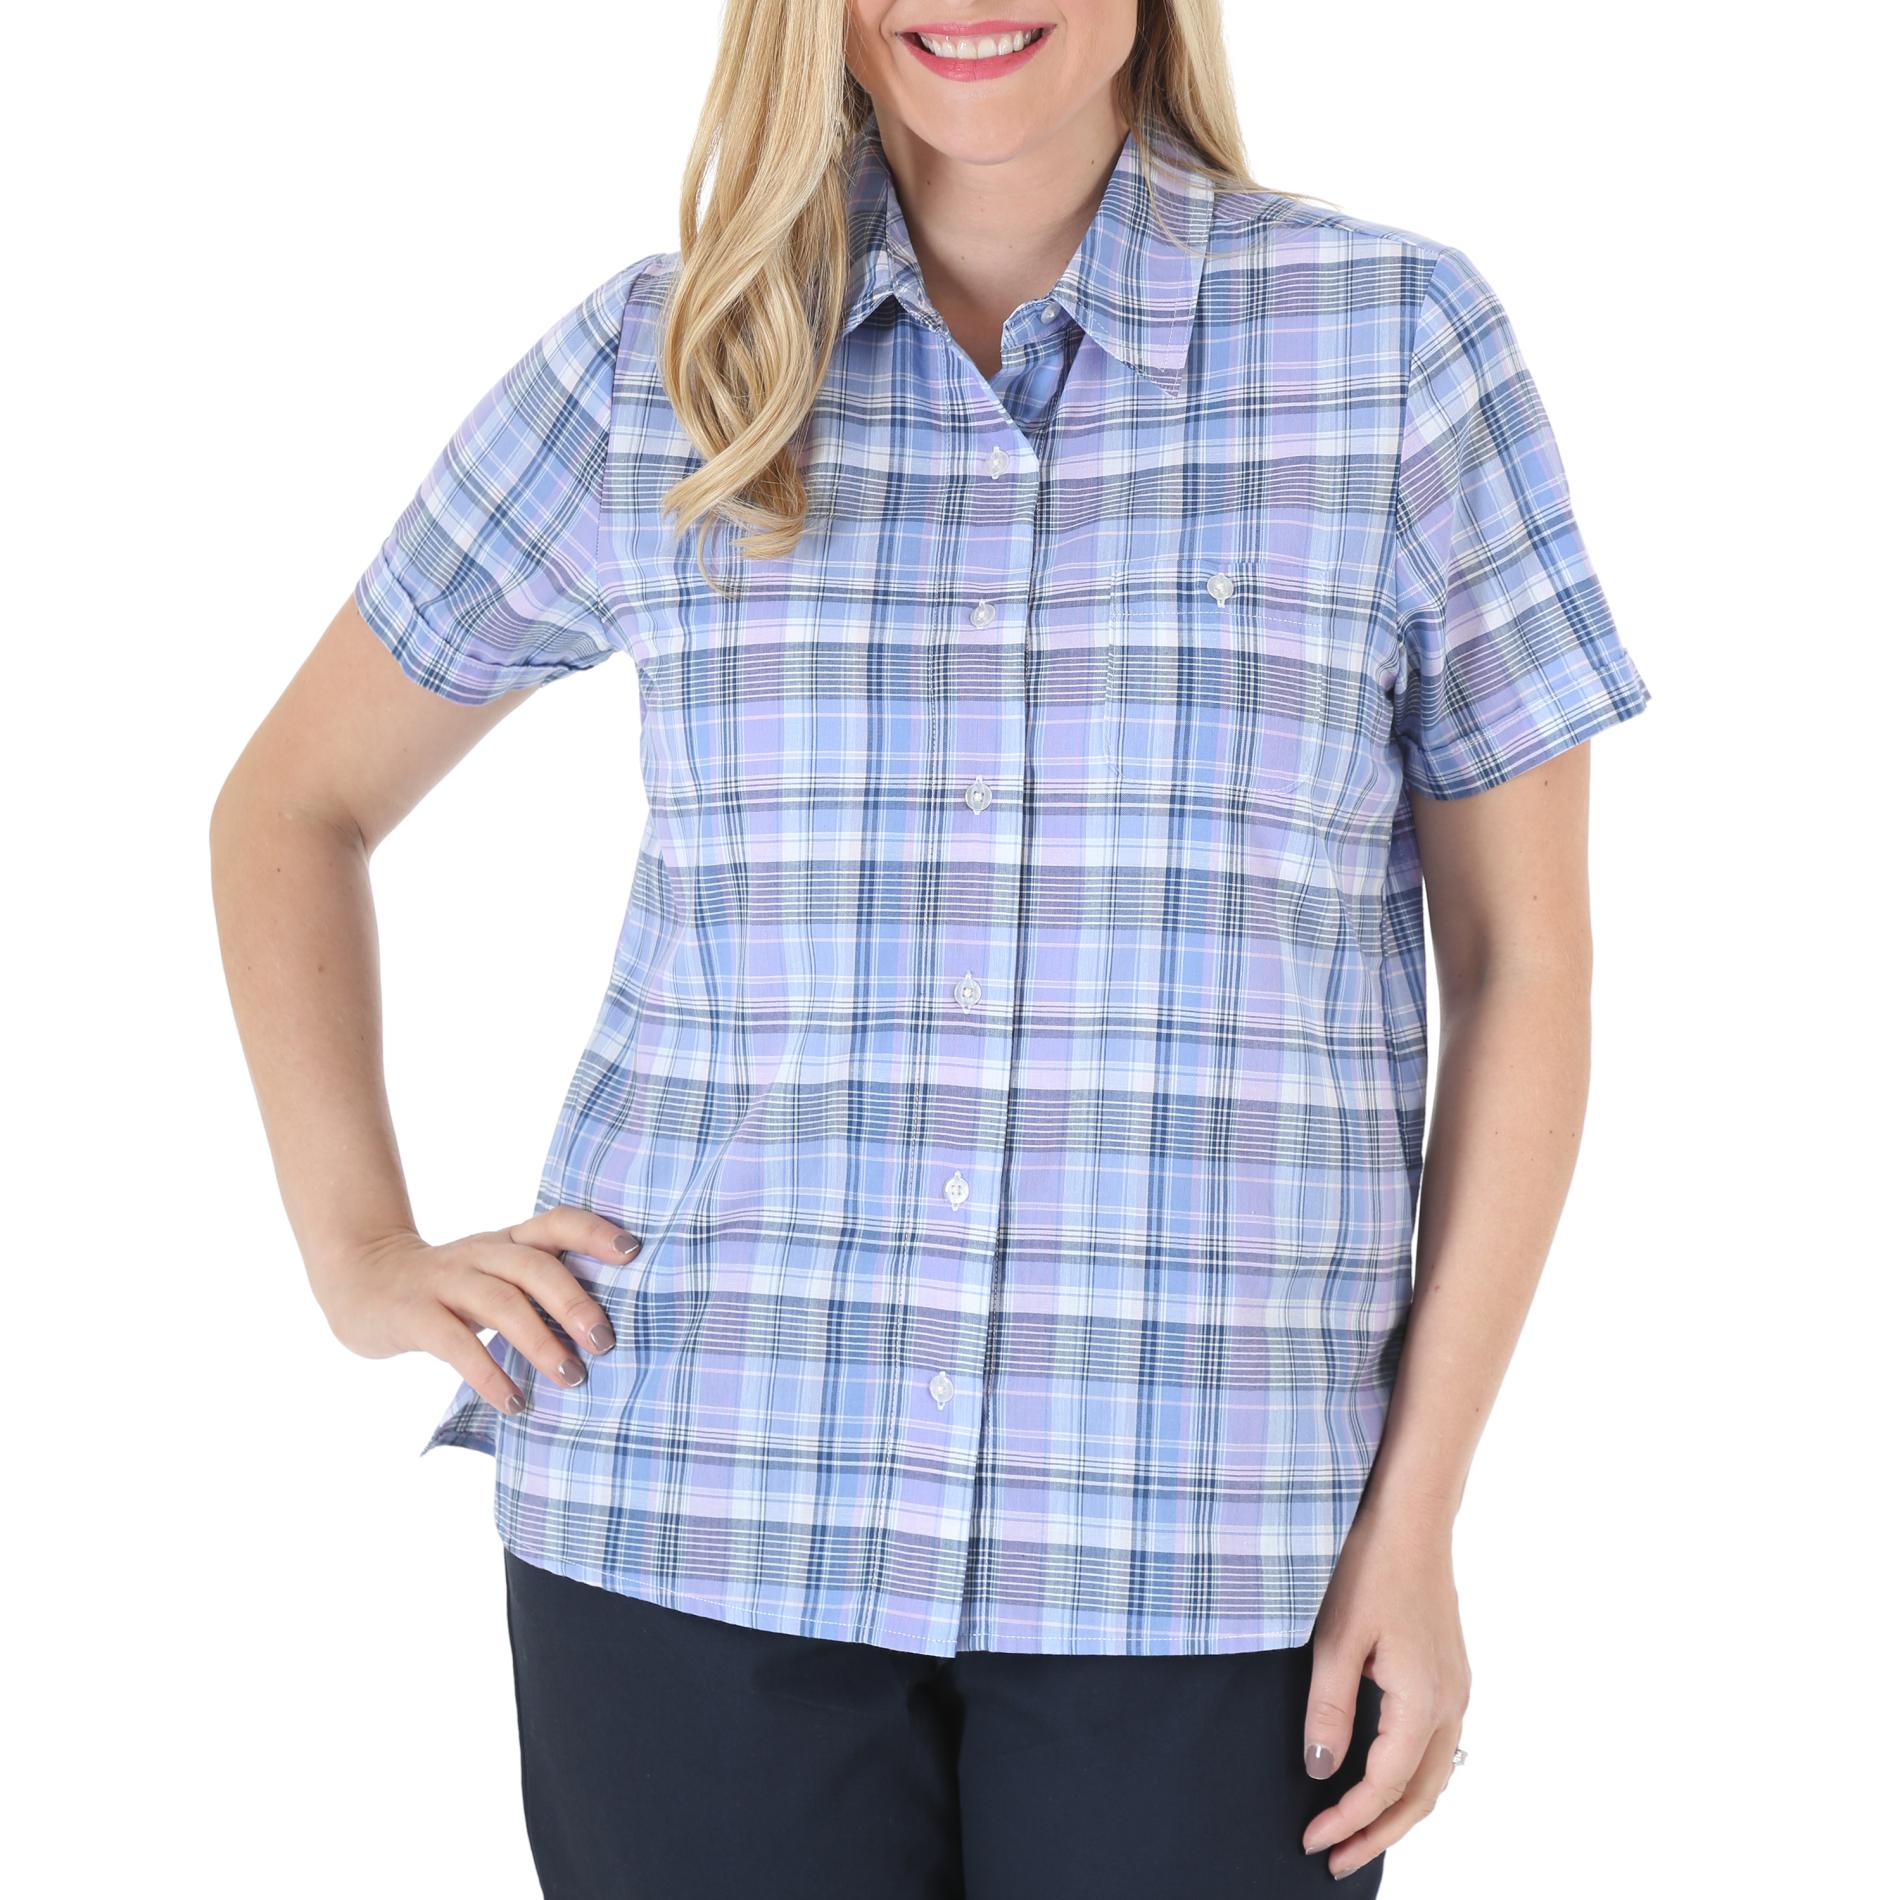 Chic Women's Short-Sleeve Button-Front Top - Plaid